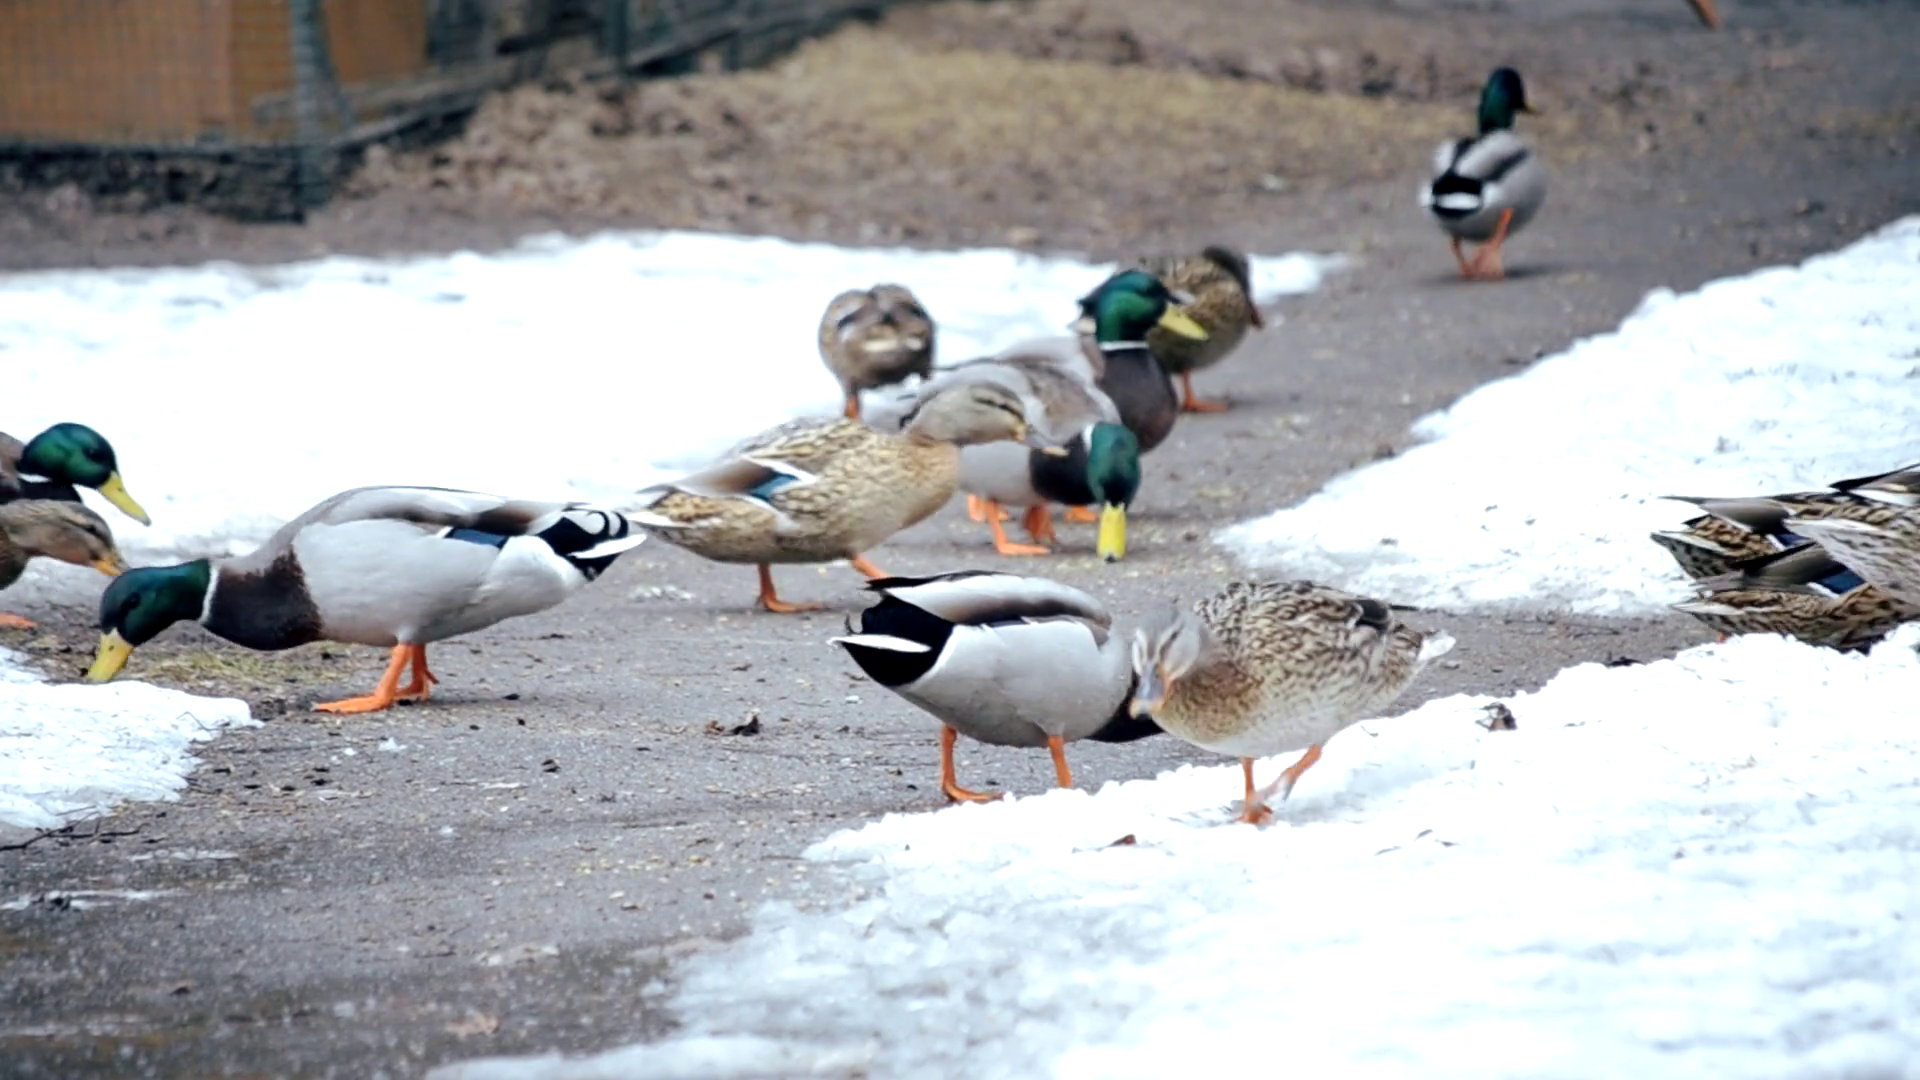 Feeding of many wild ducks and drakes in winter on snow outdoors ...